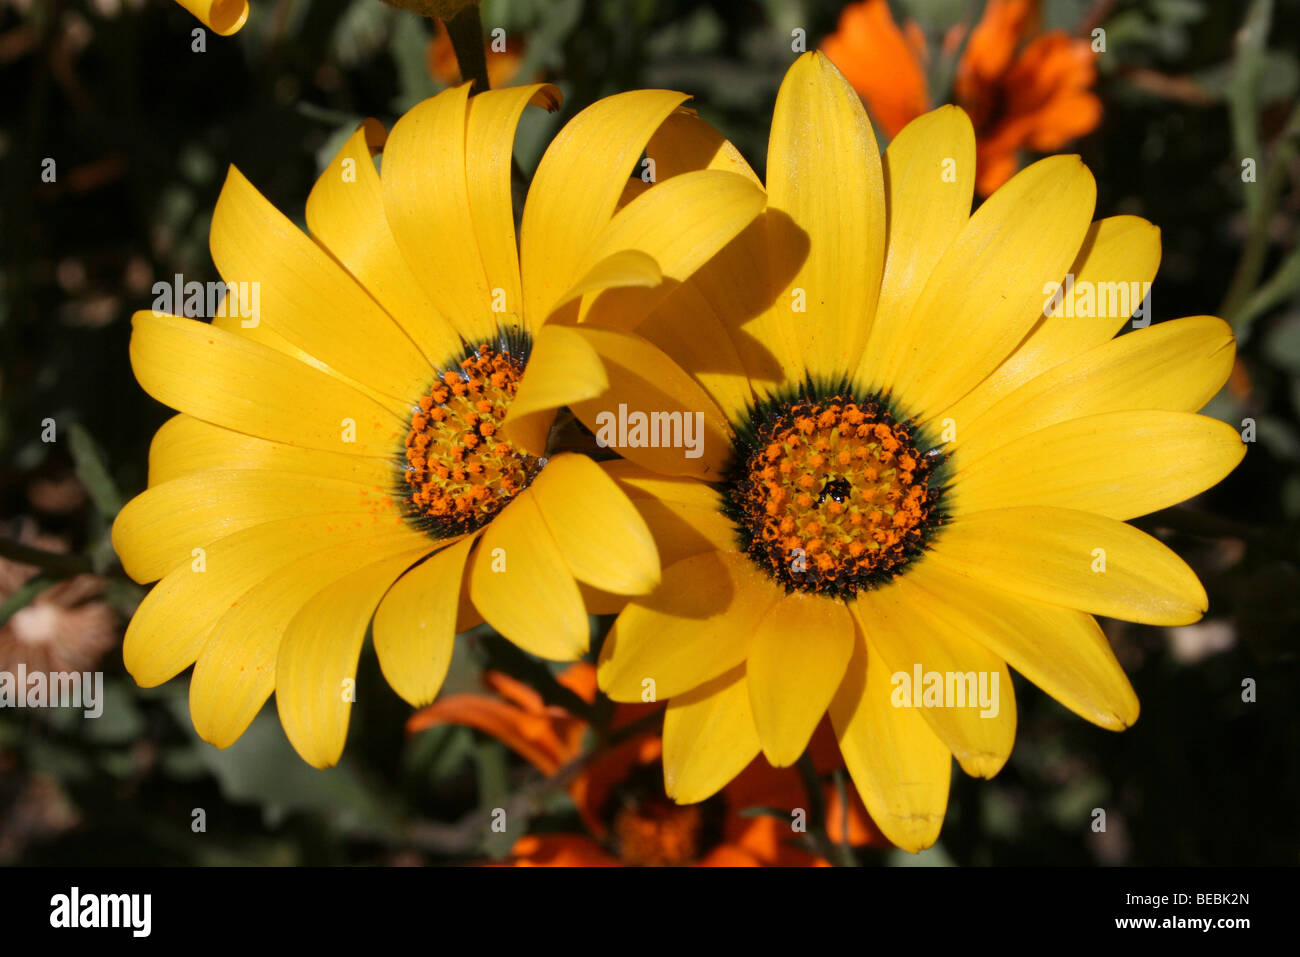 Yellow Daisies Flowering In Kwa-Zulu Natal Province, South Africa Stock Photo